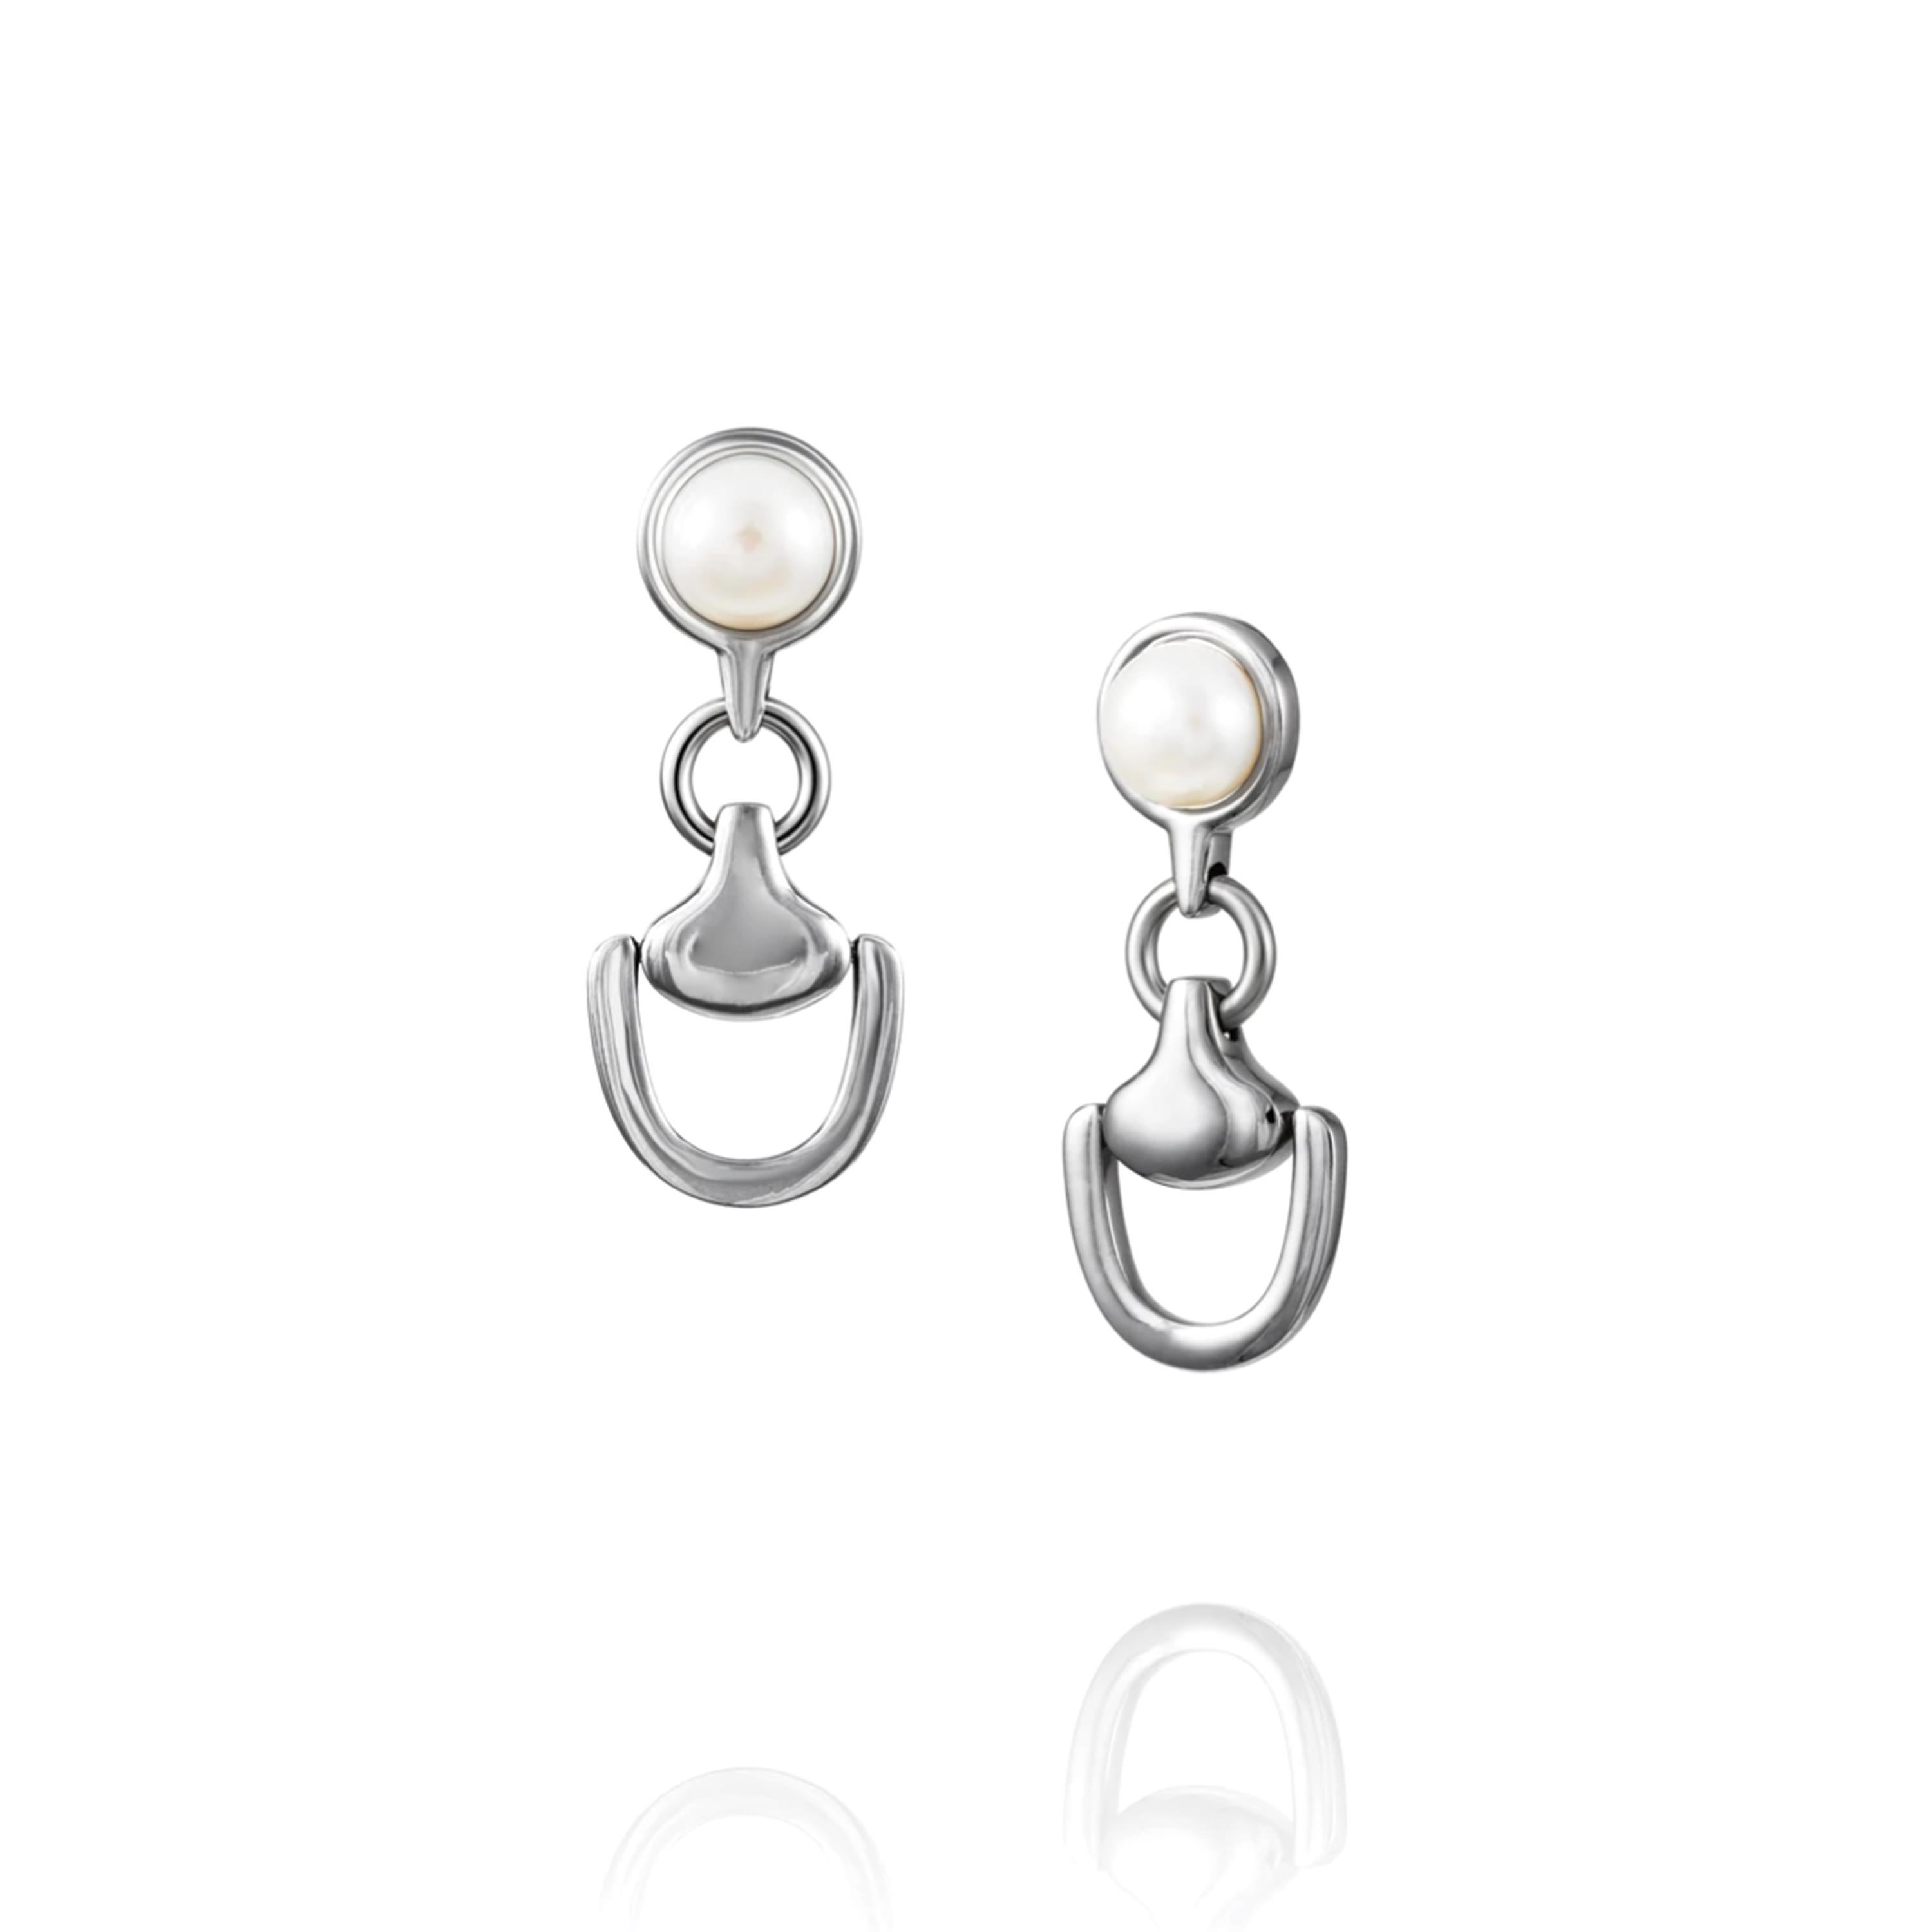 Part of the Vincent Peach Equestrian Collection, the Churchill Downs Earrings have a signature Sterling Silver Bit Drop Design with a Freshwater Pearl and Gold Fill Post. 2